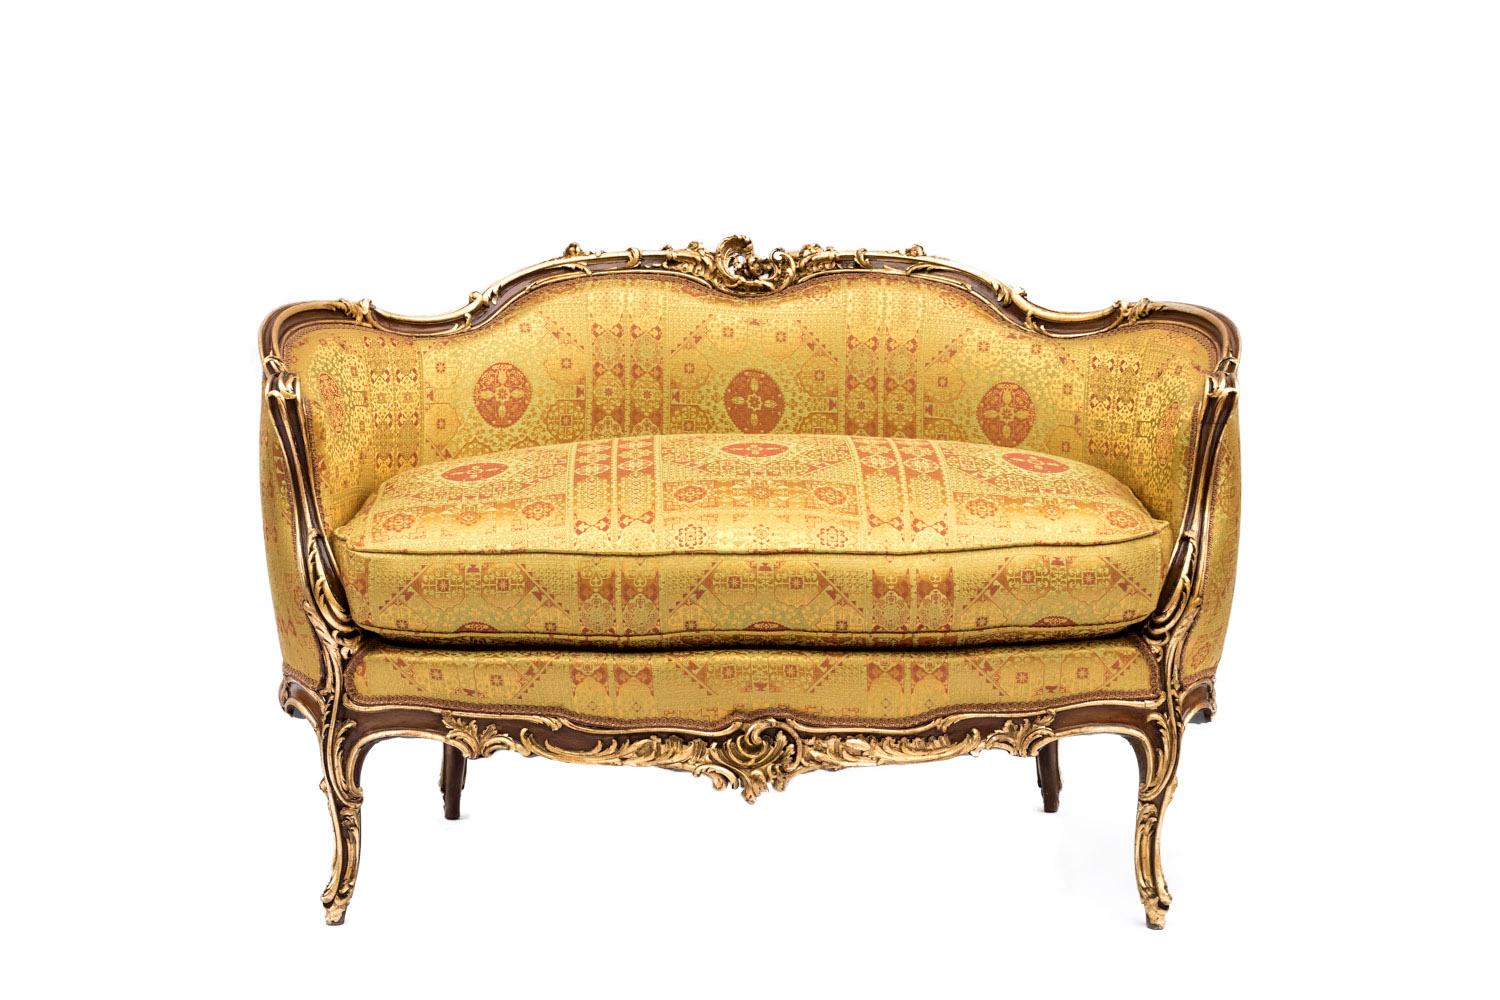 Small Rocaille style sofa in natural carved walnut with gilt highlights. It stands on four cabriole legs and uprights and crosspieces are sinuous and scalloped. Rich Rocaille ornamentation on the carved wood, such as crètes de coq, foliage and